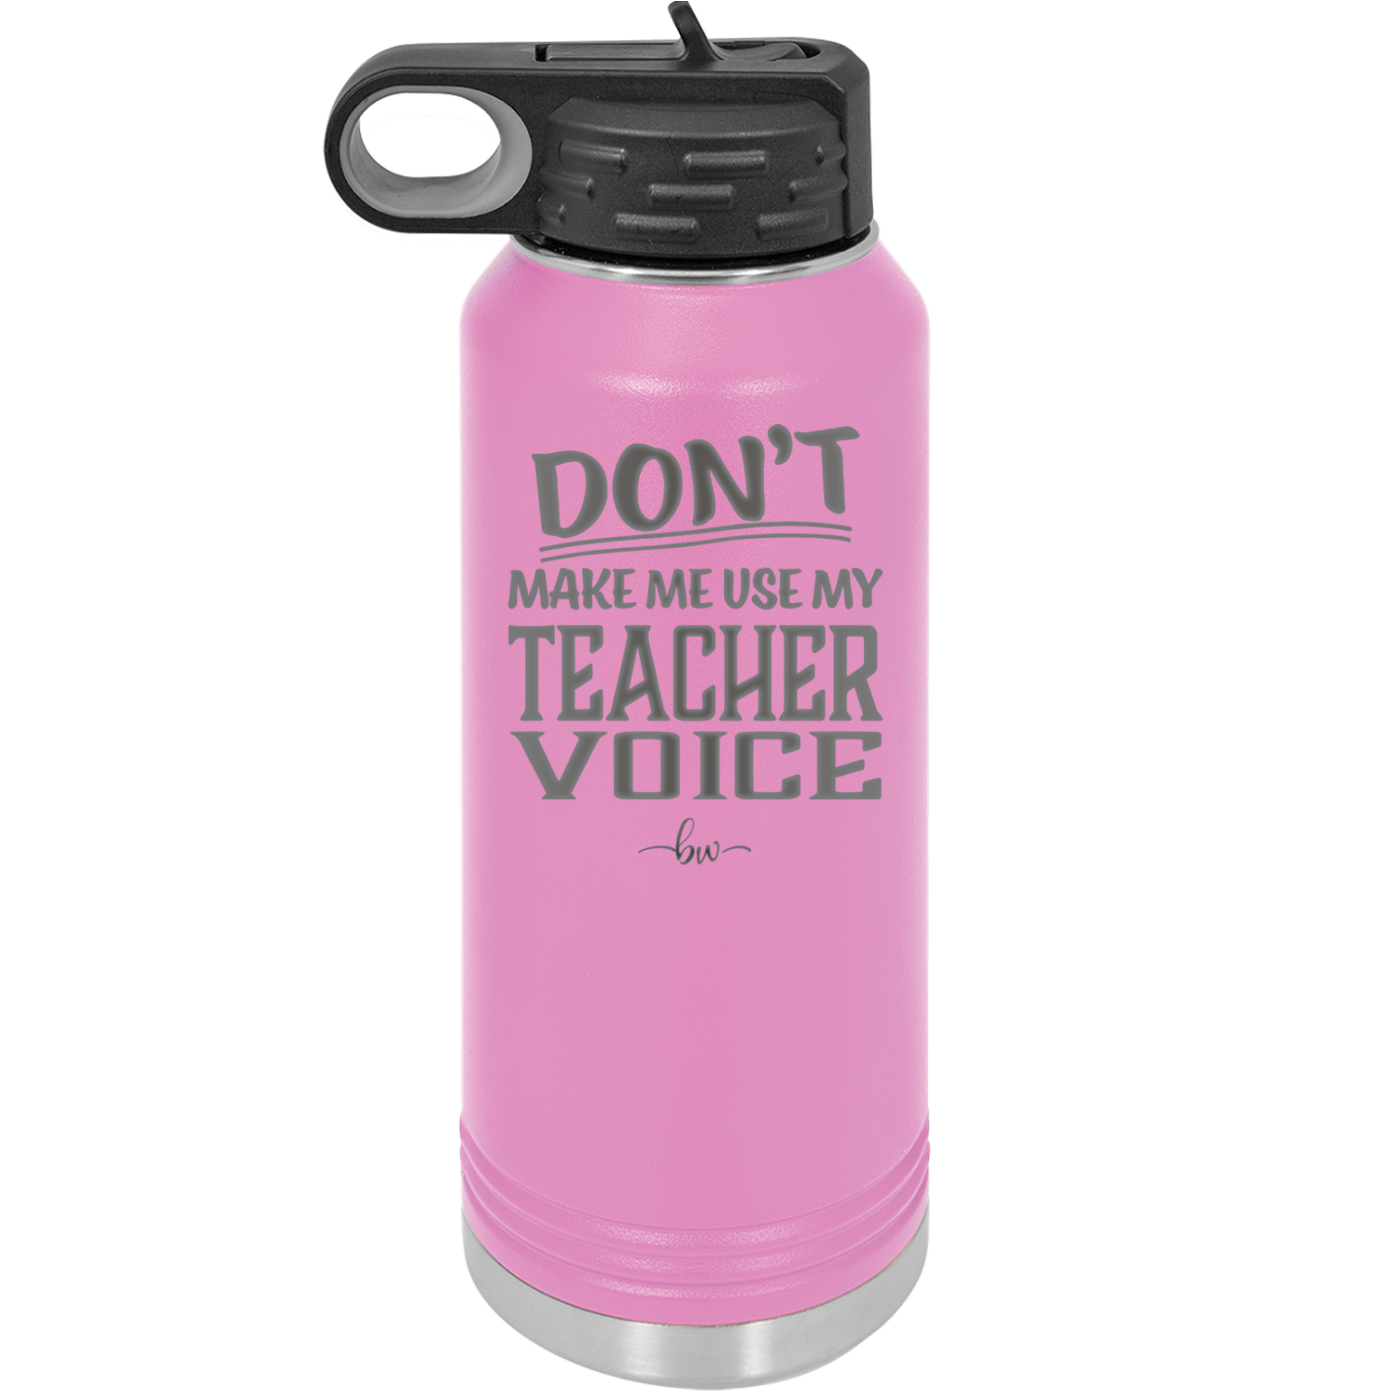 Don't Make Me Use My Teacher Voice - Laser Engraved Stainless Steel Drinkware - 1537 -